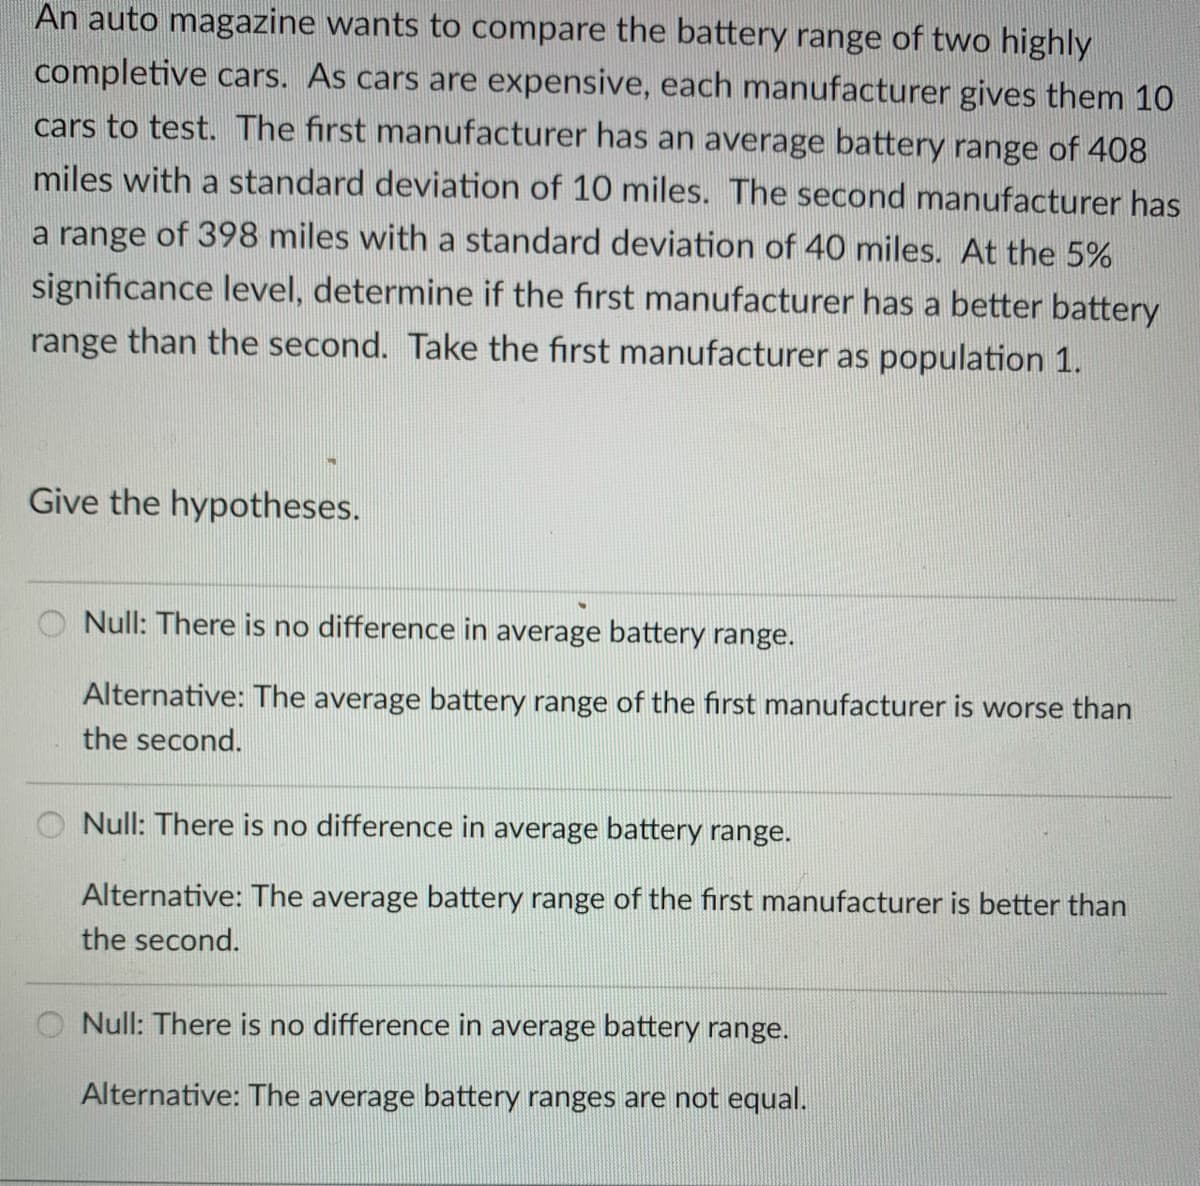 An auto magazine wants to compare the battery range of two highly
completive cars. As cars are expensive, each manufacturer gives them 10
cars to test. The first manufacturer has an average battery range of 408
miles with a standard deviation of 10 miles. The second manufacturer has
a range of 398 miles with a standard deviation of 40 miles. At the 5%
significance level, determine if the first manufacturer has a better battery
range than the second. Take the first manufacturer as population 1.
Give the hypotheses.
O Null: There is no difference in average battery range.
Alternative: The average battery range of the first manufacturer is worse than
the second.
Null: There is no difference in average battery range.
Alternative: The average battery range of the first manufacturer is better than
the second.
Null: There is no difference in average battery range.
Alternative: The average battery ranges are not equal.
